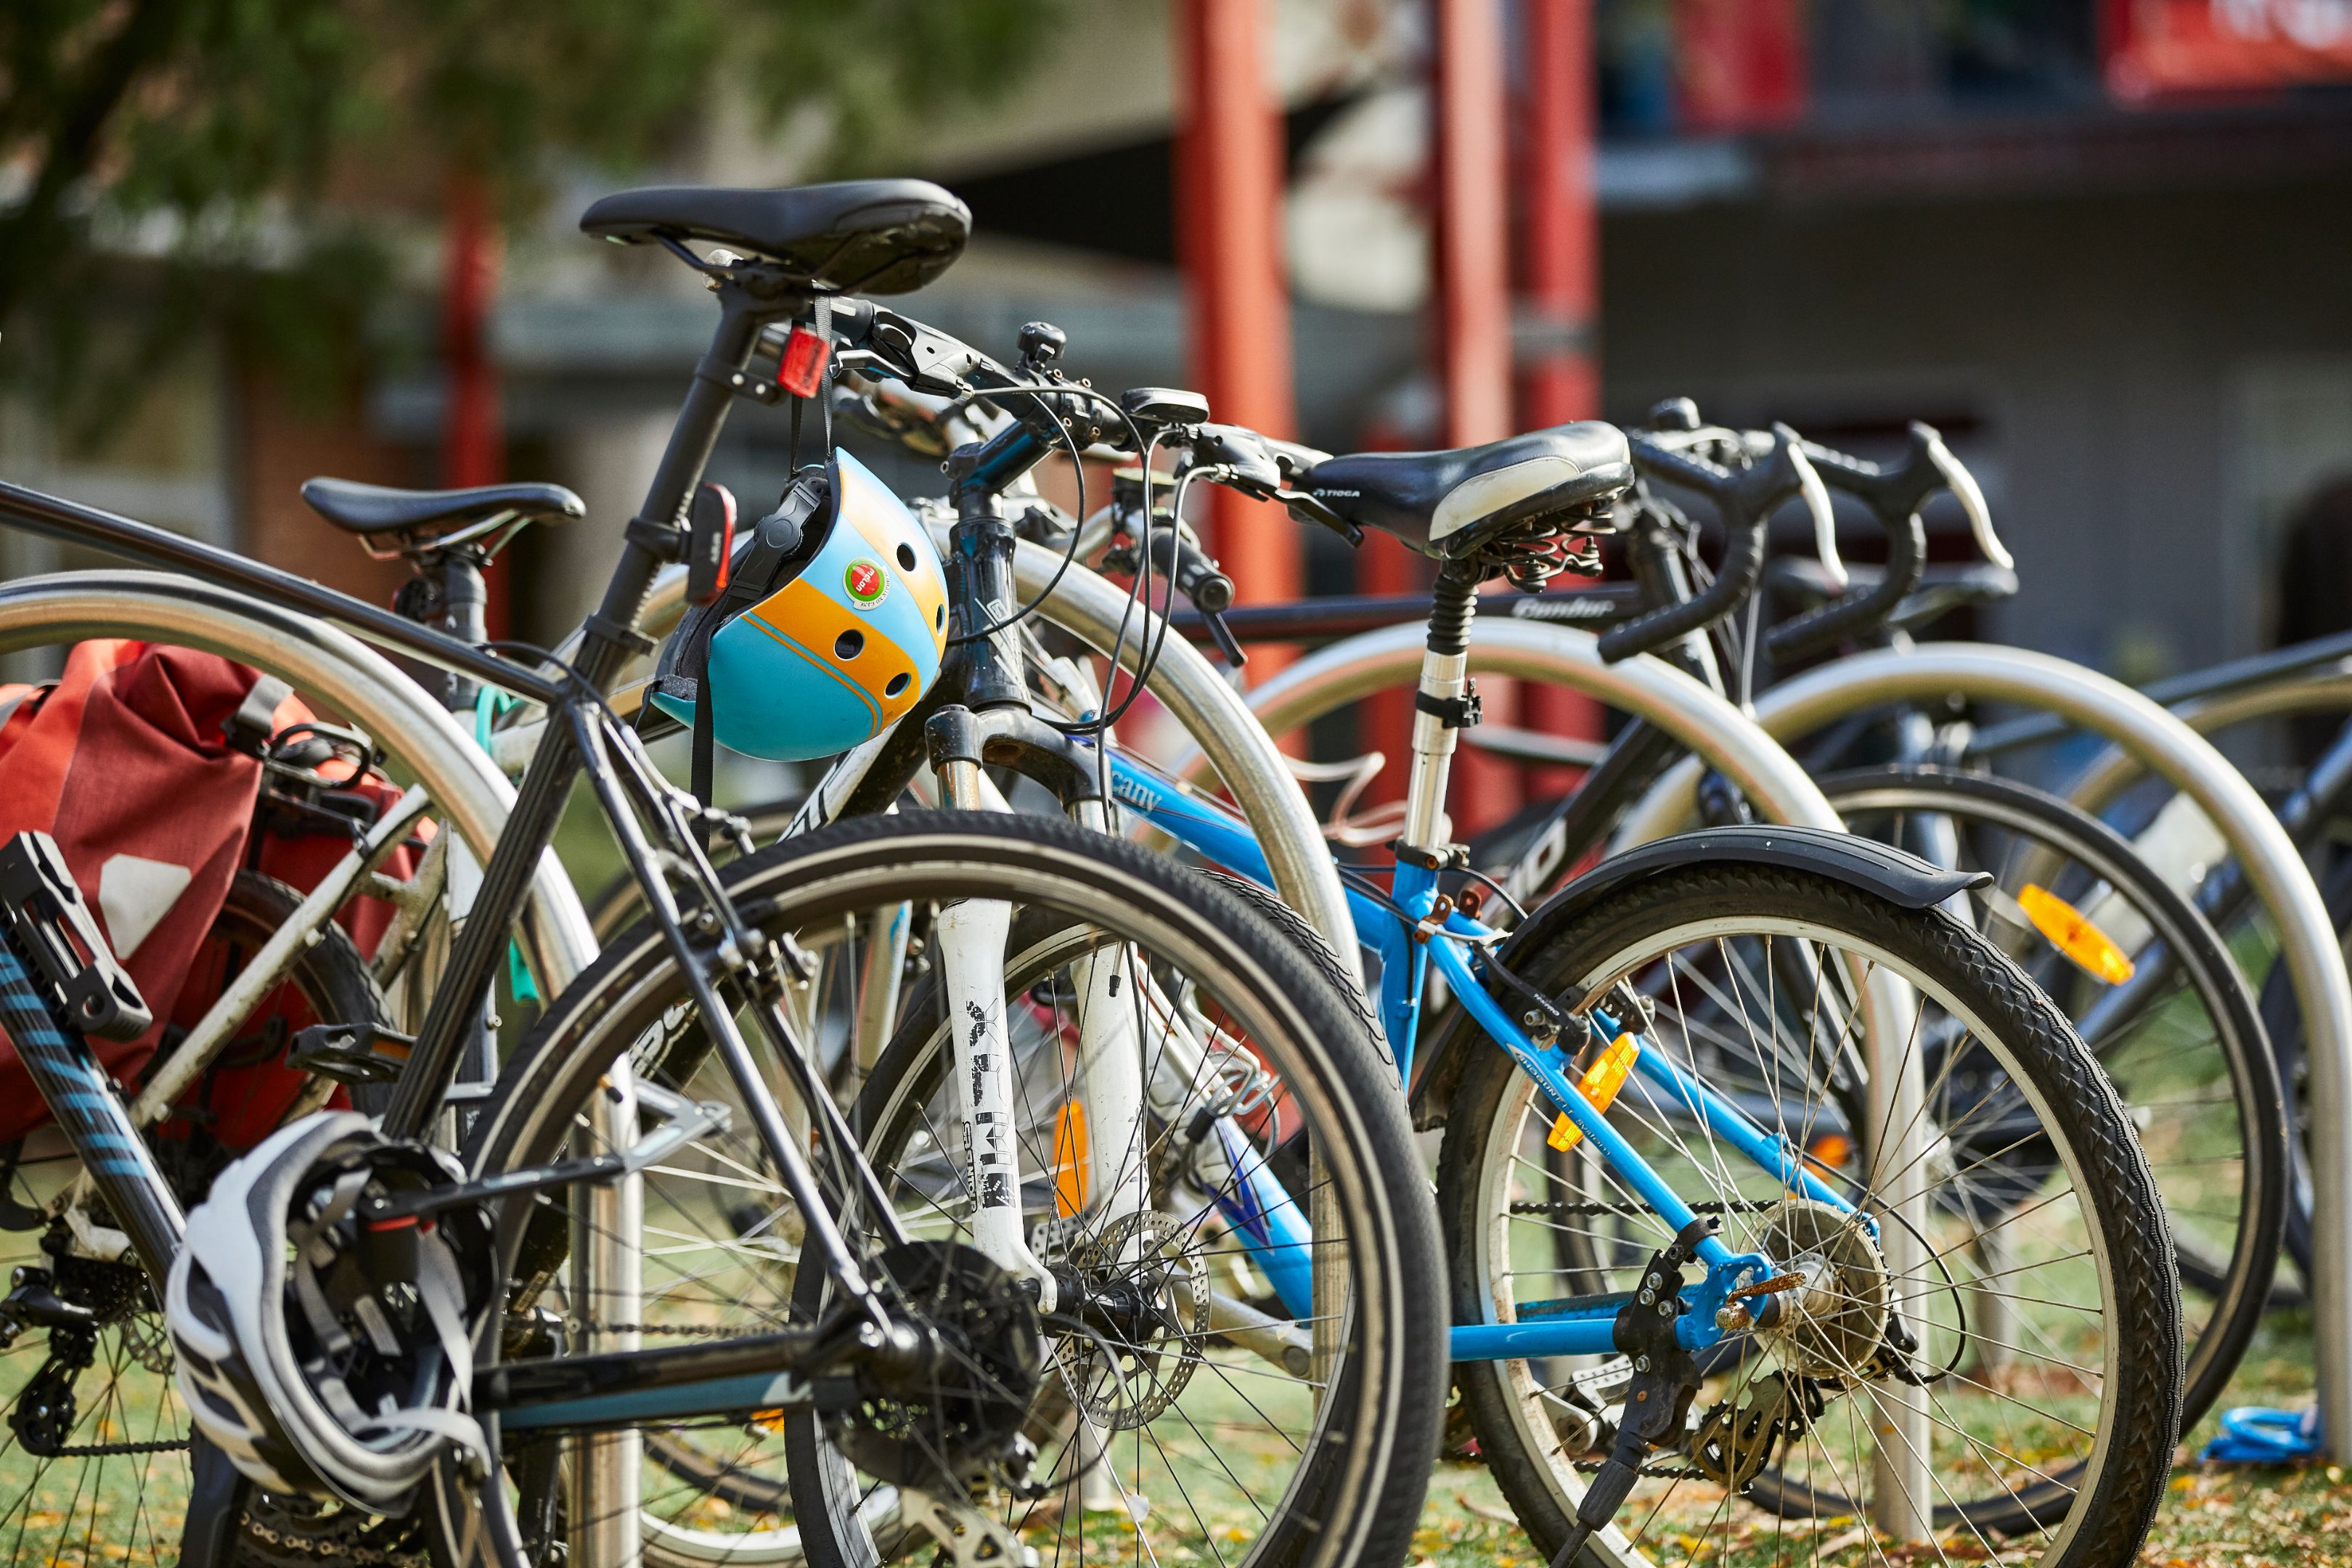 Bikes securely locked at Hawthorn campus bicycle parking area